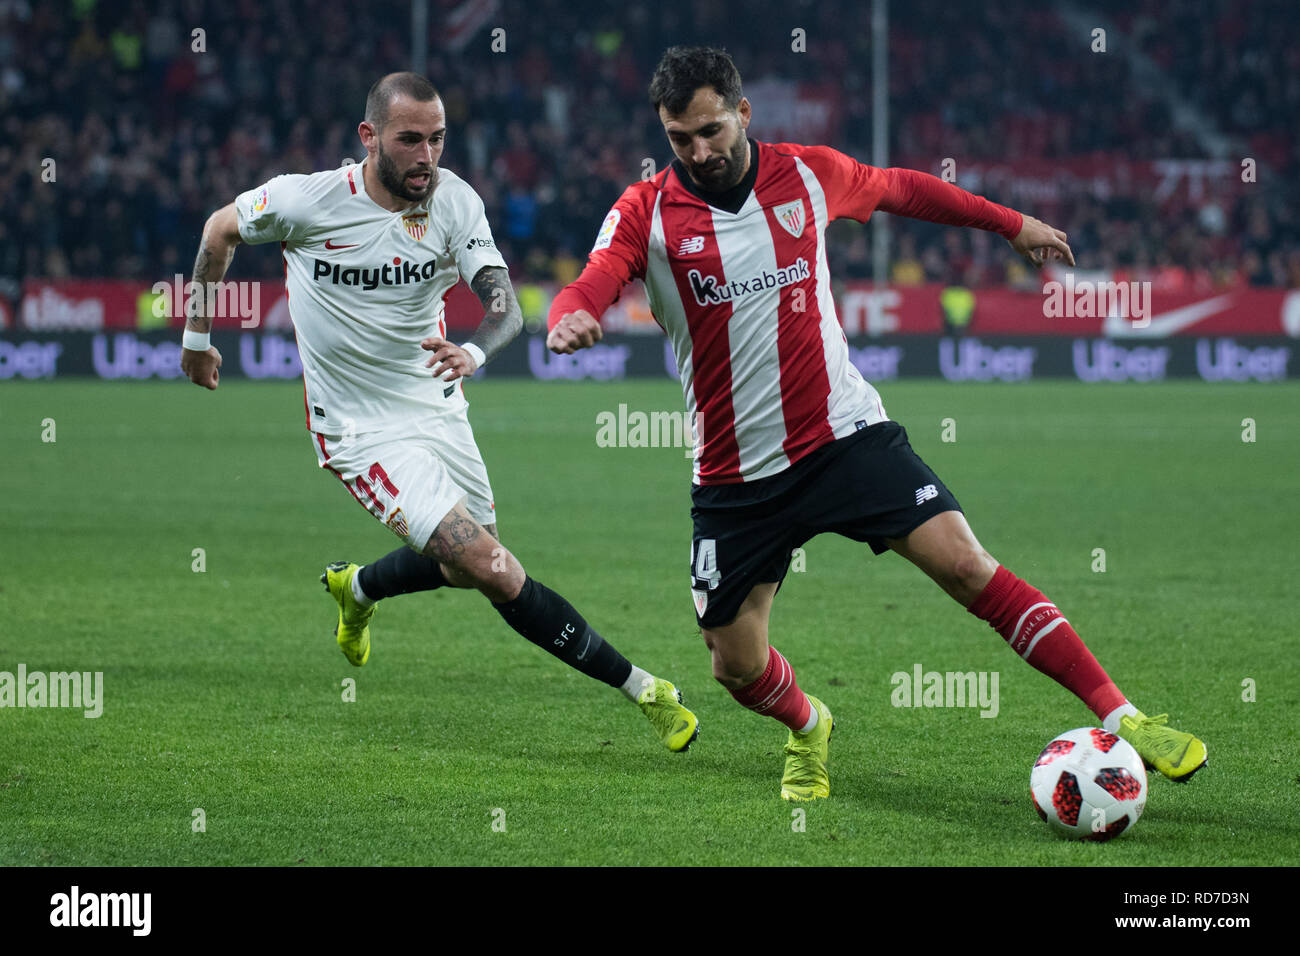 Sevilla, Spain. 16th Jan, 2019. Aleix Vidal of Sevilla FC and Balenciaga of  Athletic Club competes for the ball during the Copa del Rey match between  Sevilla FC v Athletic Club at